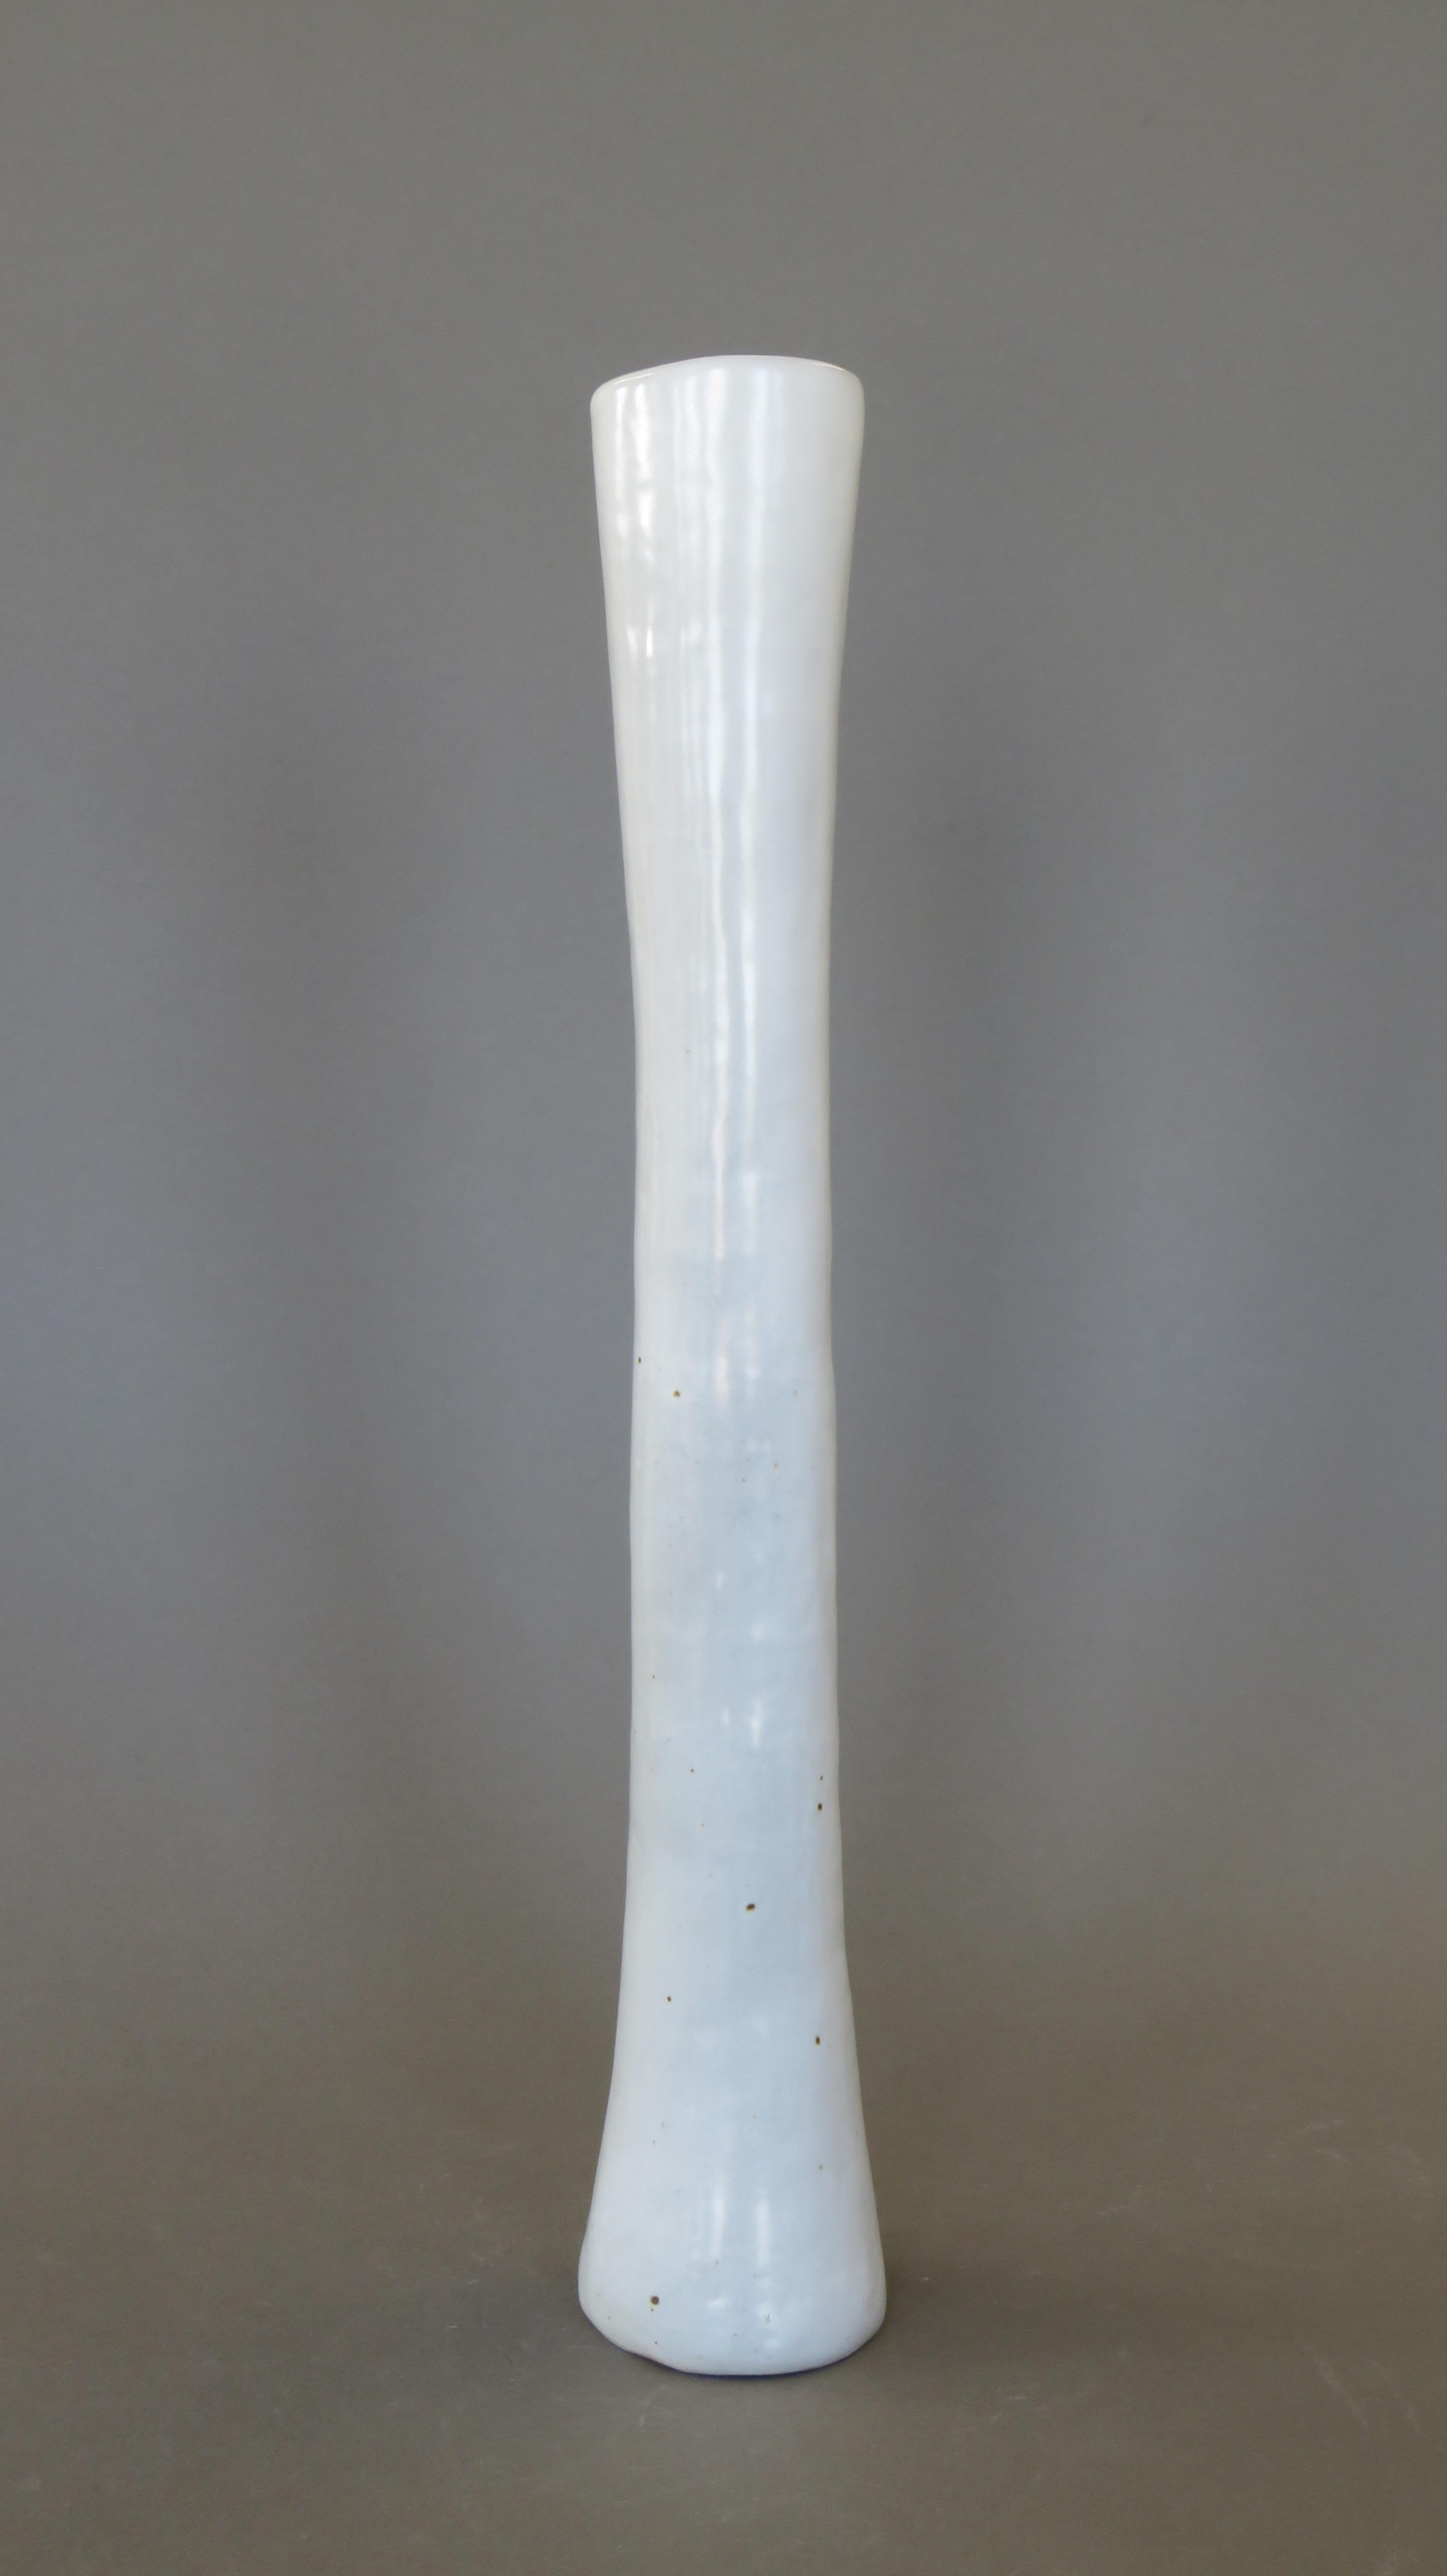 Very Tall, Sculptural Hand Built White Vase.  This series of vases was made as an investigation into functional sculpture, not just as ordinary vases but true statement pieces.  Echoing the flow of air or the sound of music, these elongated vessels,